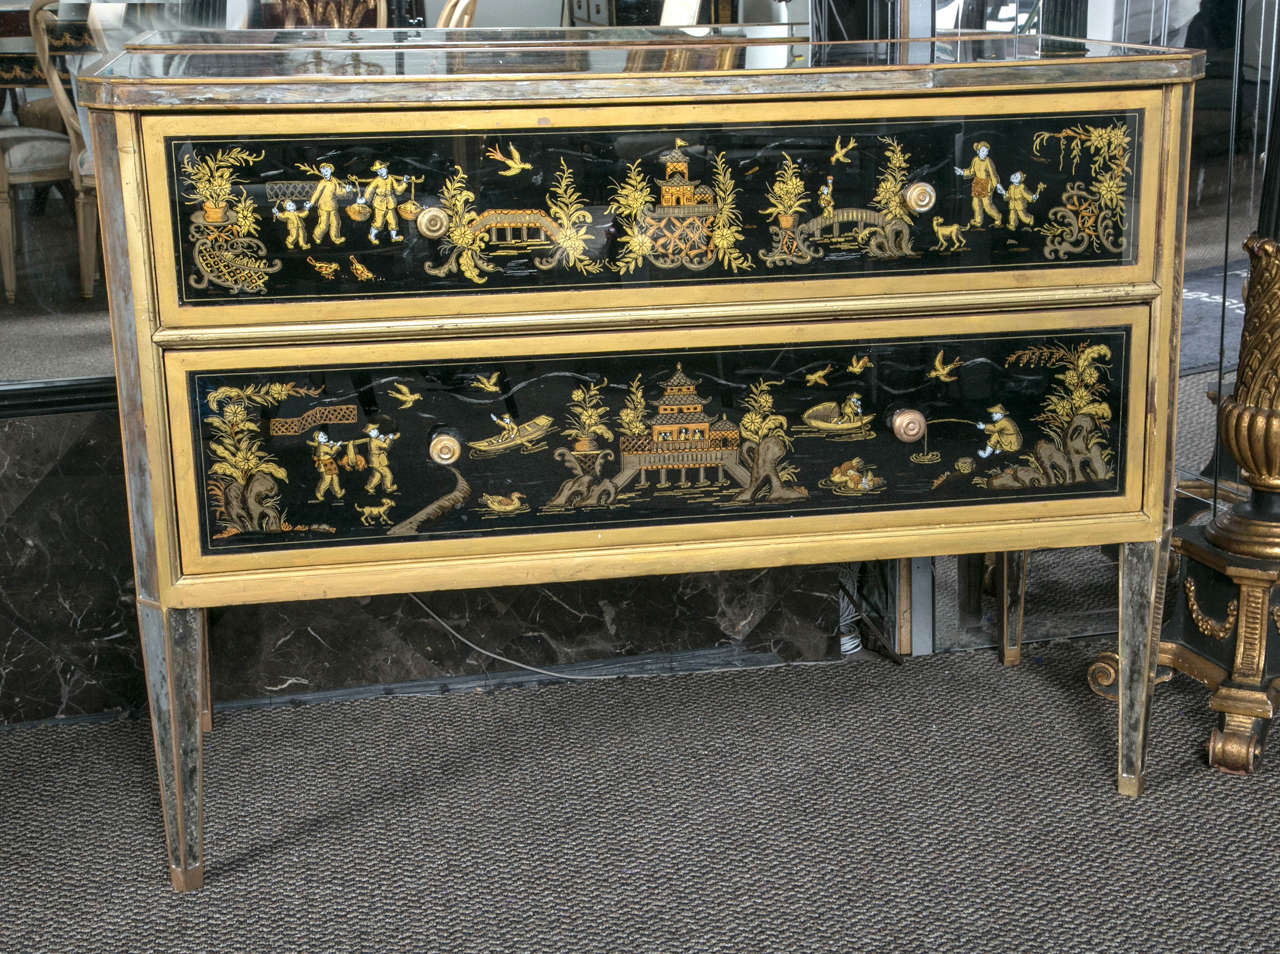 This is one of a compatible pair of Maison Jansen reverse glass paint decorated Chinoiserie commodes, late 19th-early 20th century. Exquisite in detail and storyline, colors are fabulous. Truly unique compatible pair that will add beauty to any room